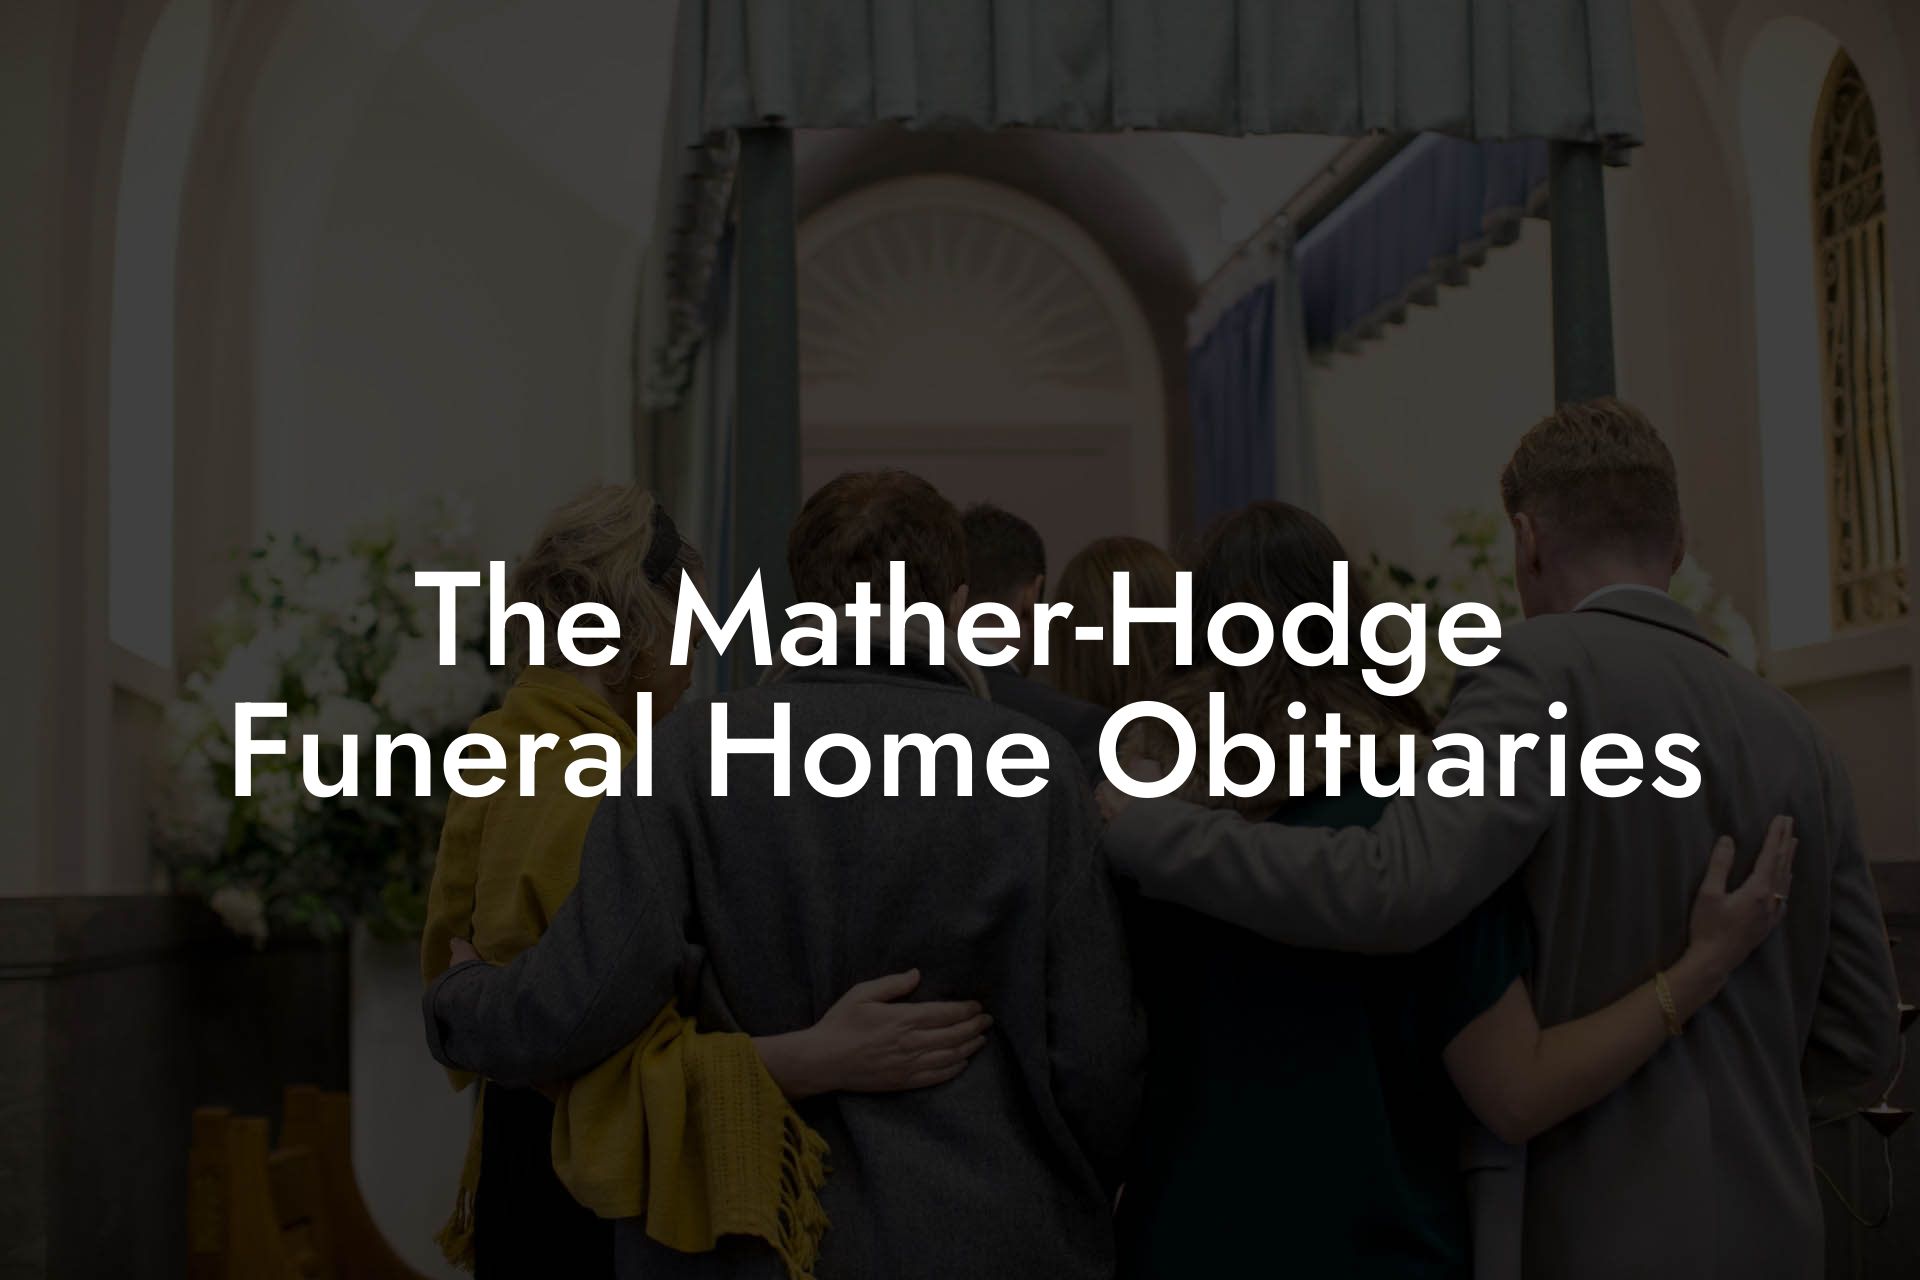 The Mather-Hodge Funeral Home Obituaries